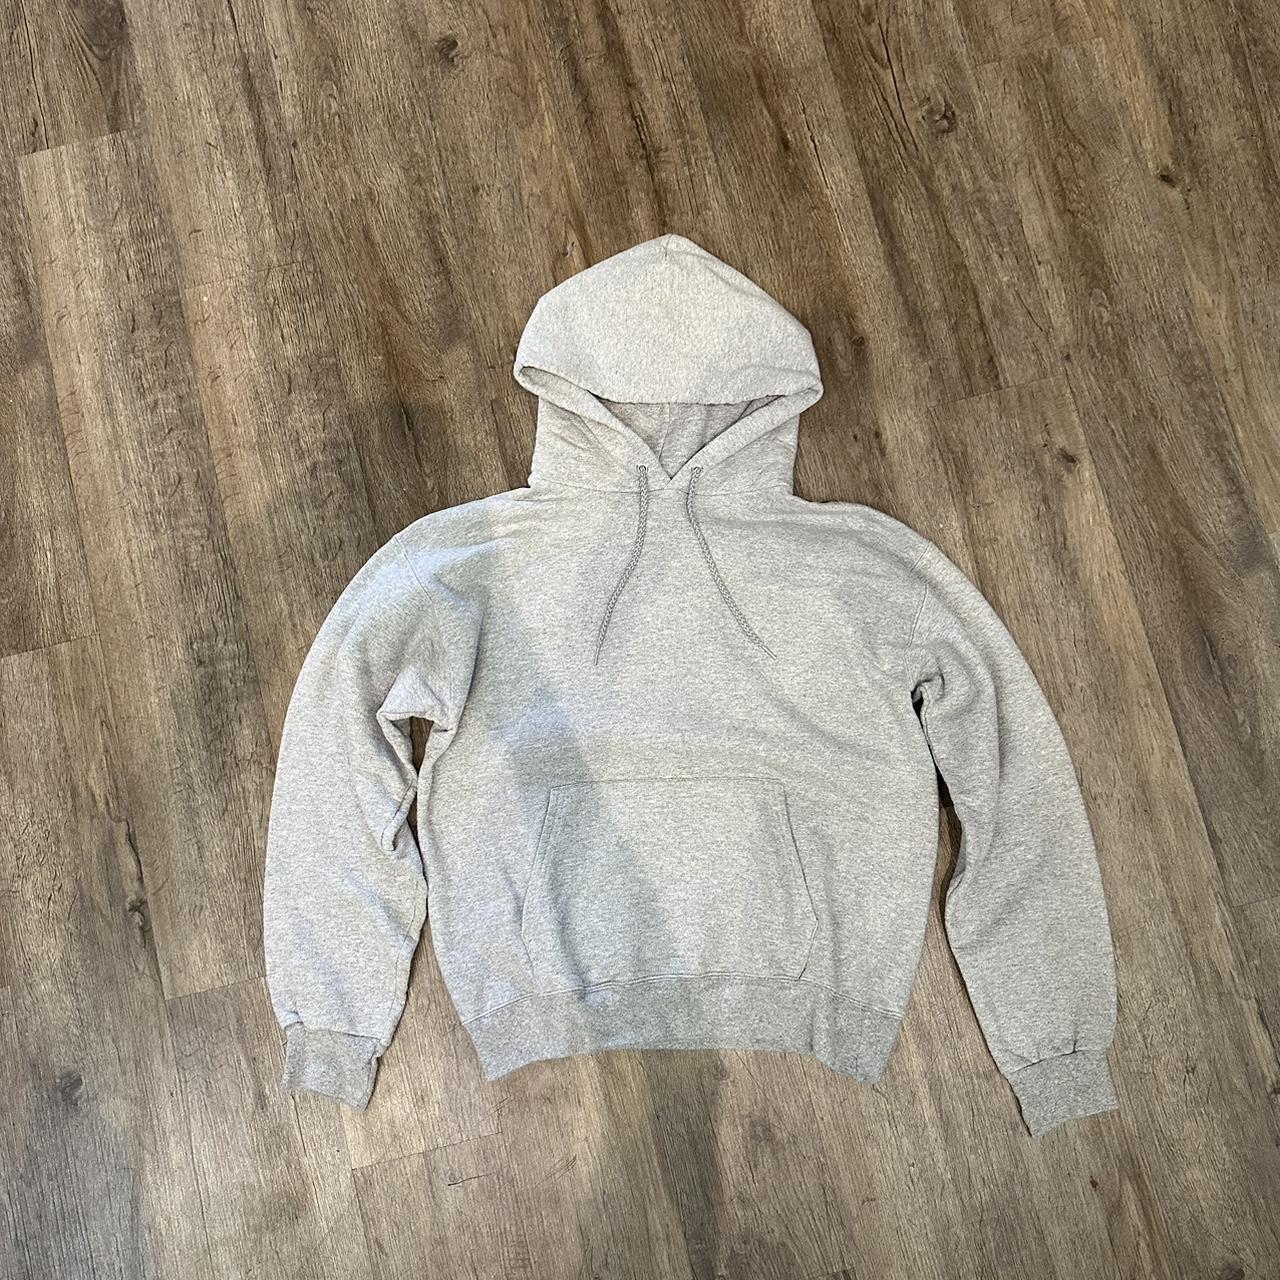 Super soft SC&CO size XL grey hoody with strings. - Depop